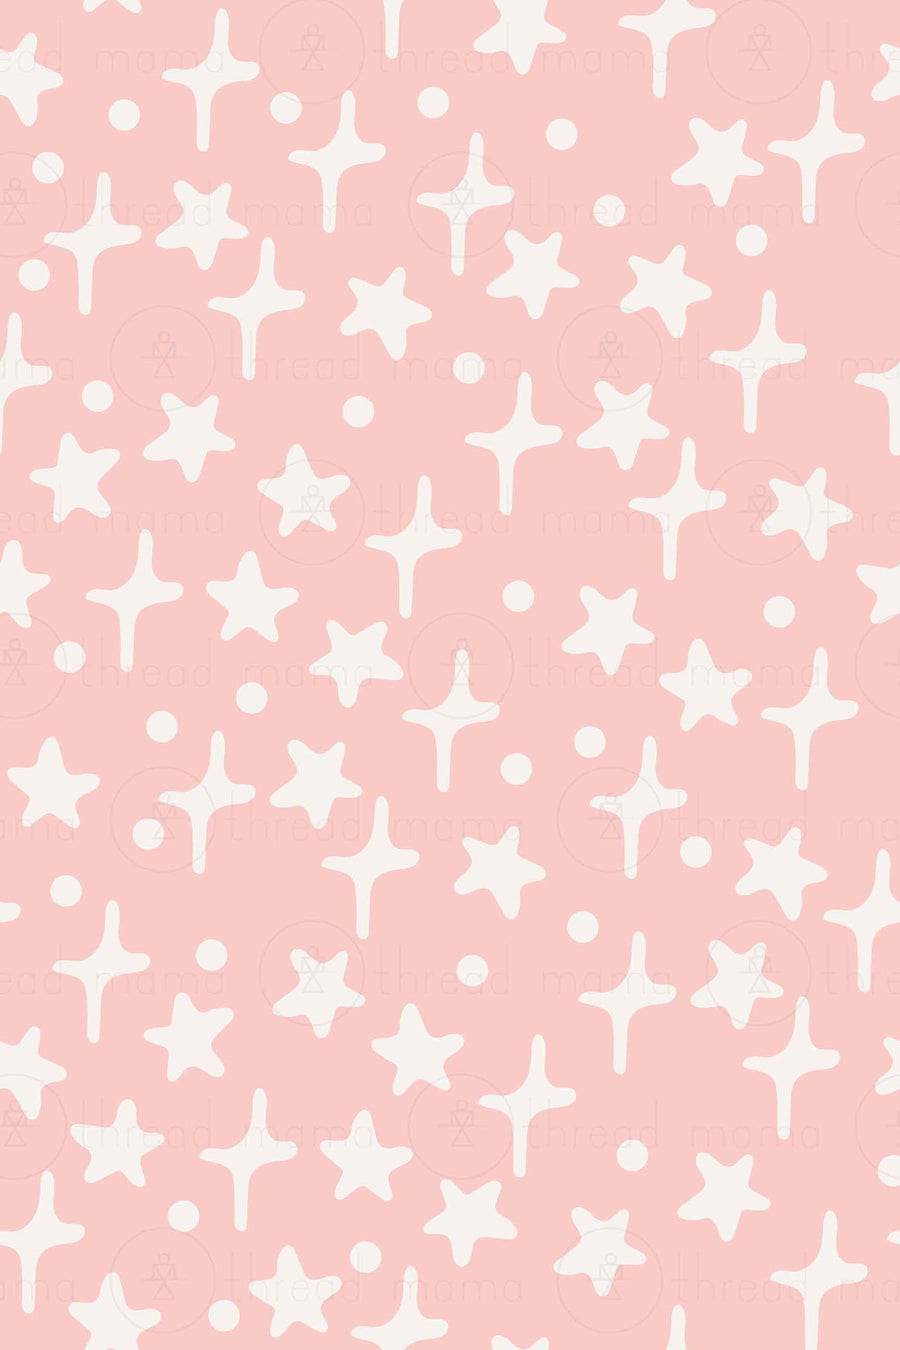 Background Pattern #60 (Printable Poster)